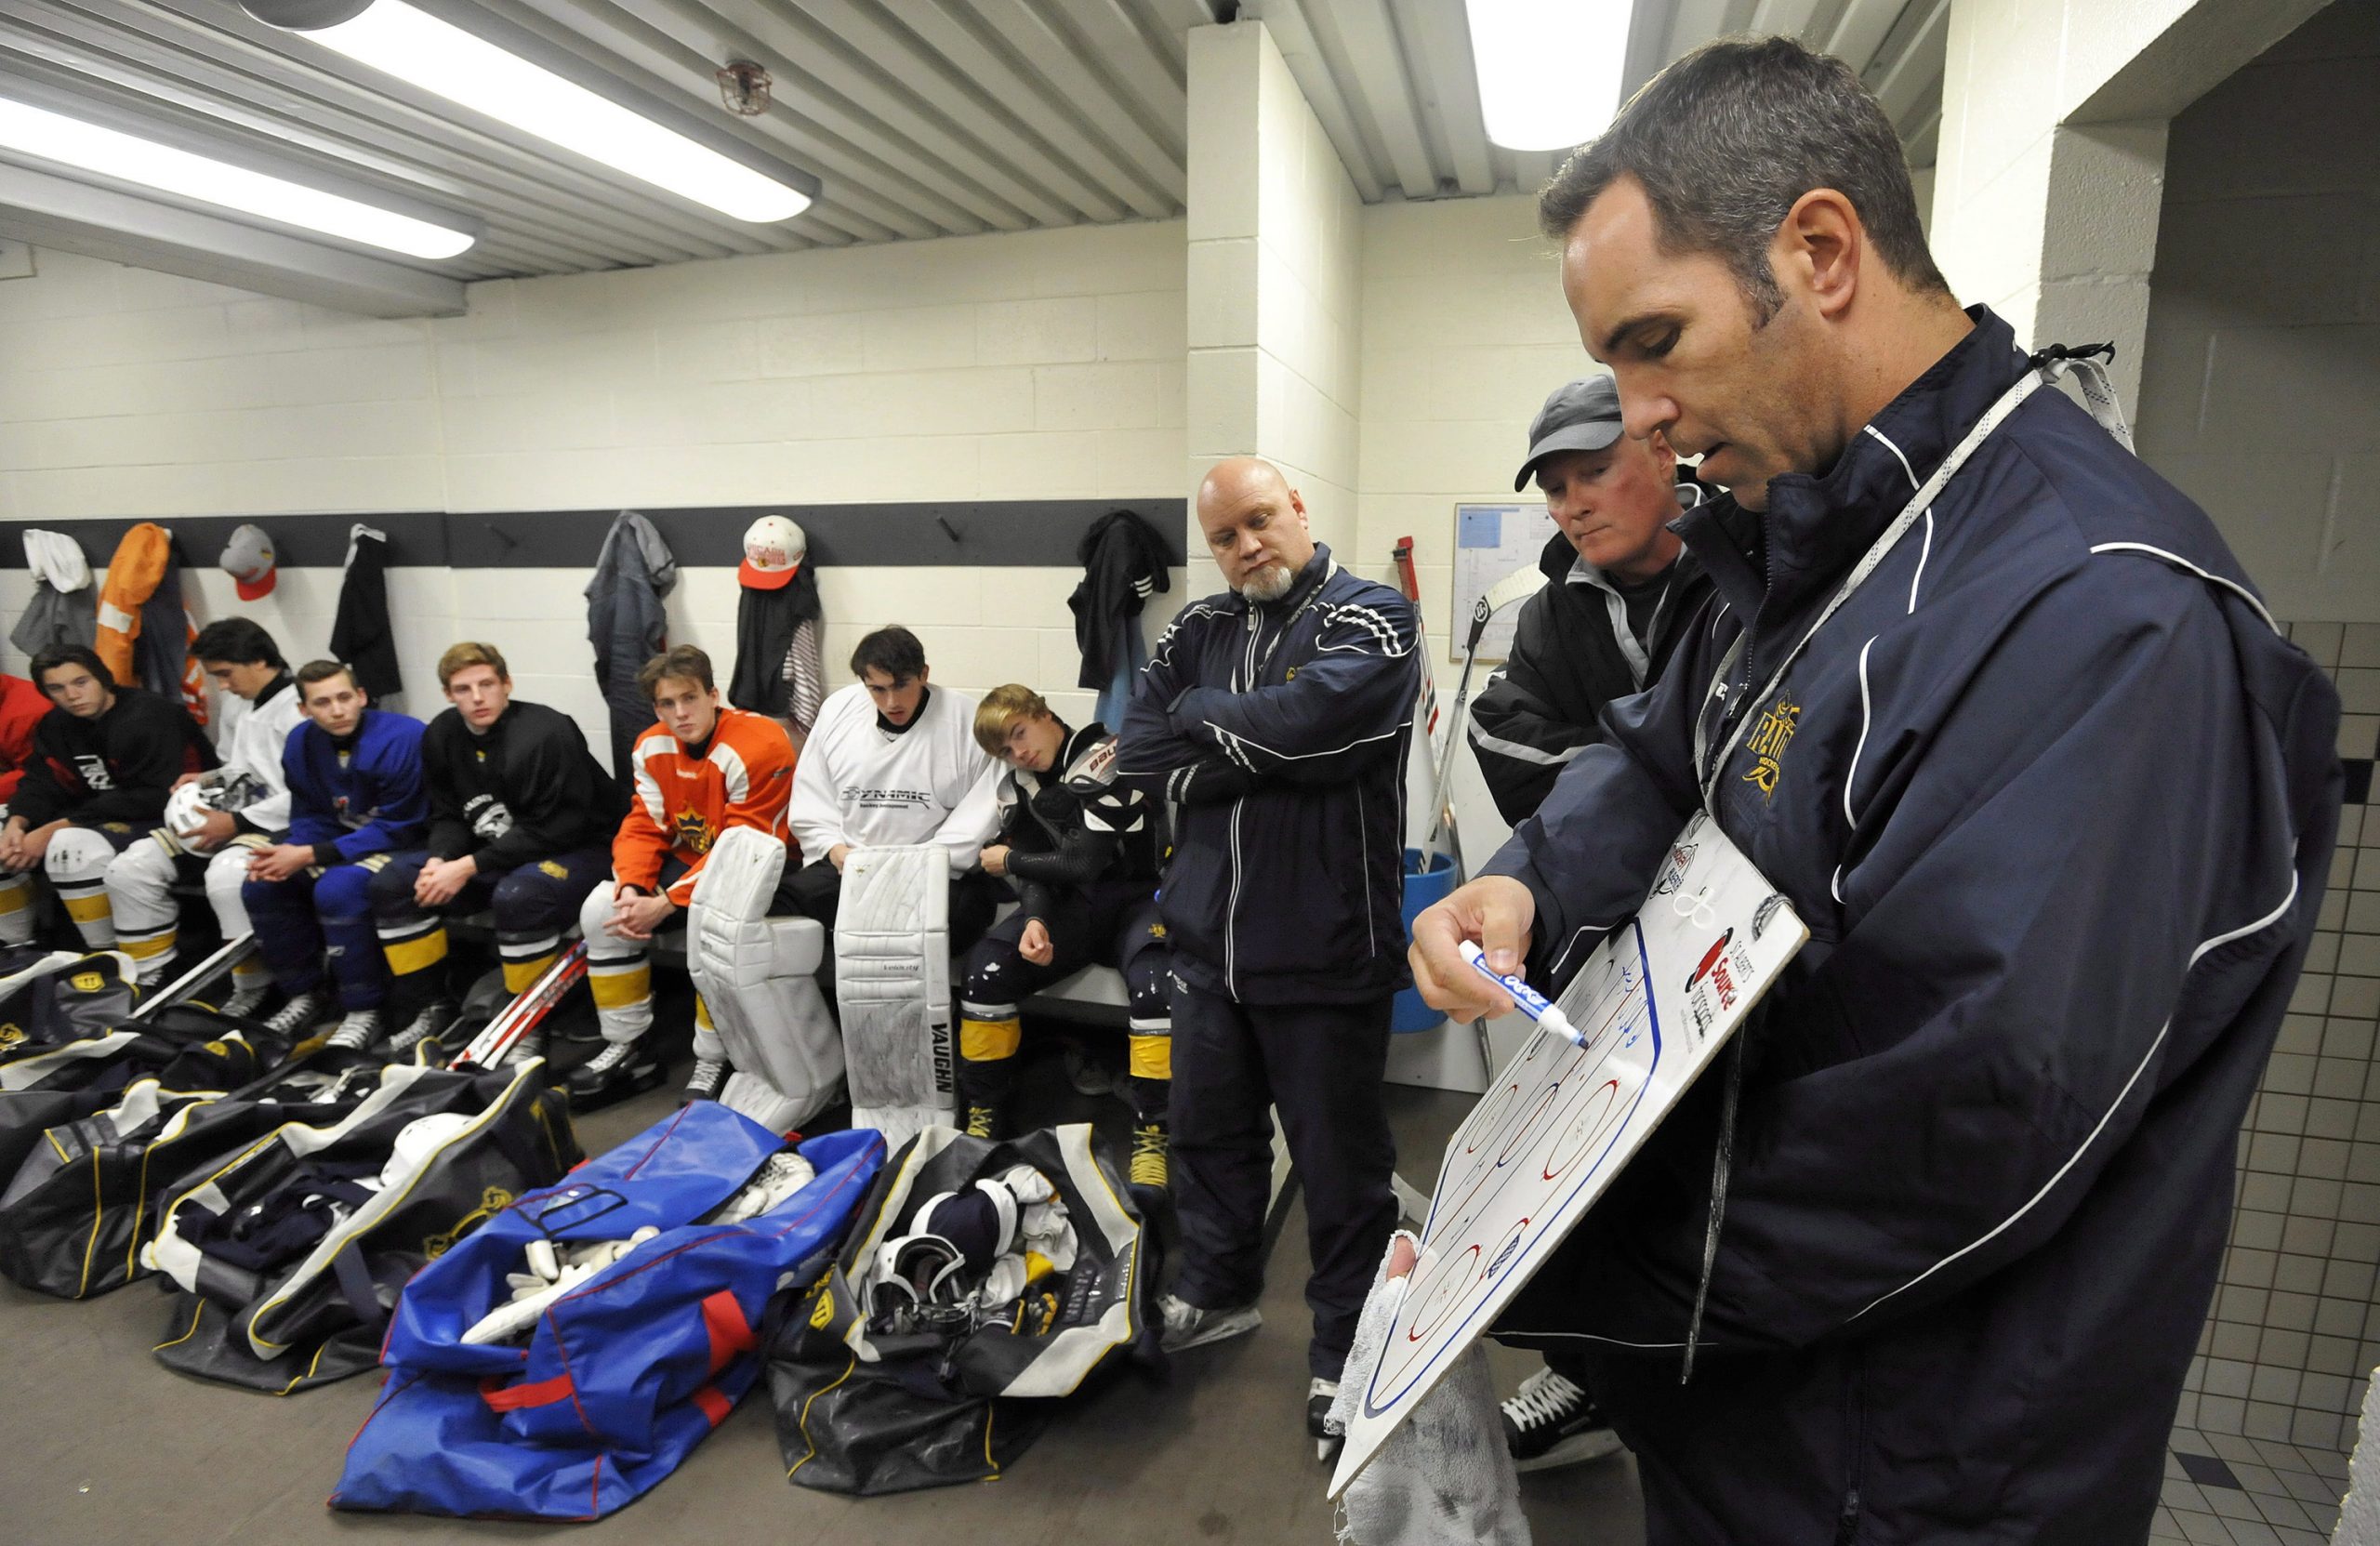 Former-NHL-player-Chris-Joseph-(right),-co-coach-of-the-St.-Albert-Midget-AA-Blues,-outlines-a-drill-prior-to-practice-in-St.-Albert,-Alta.,-Tuesday,-Sept.-23,-2014.-(Dan-Riedlhuber/CP)